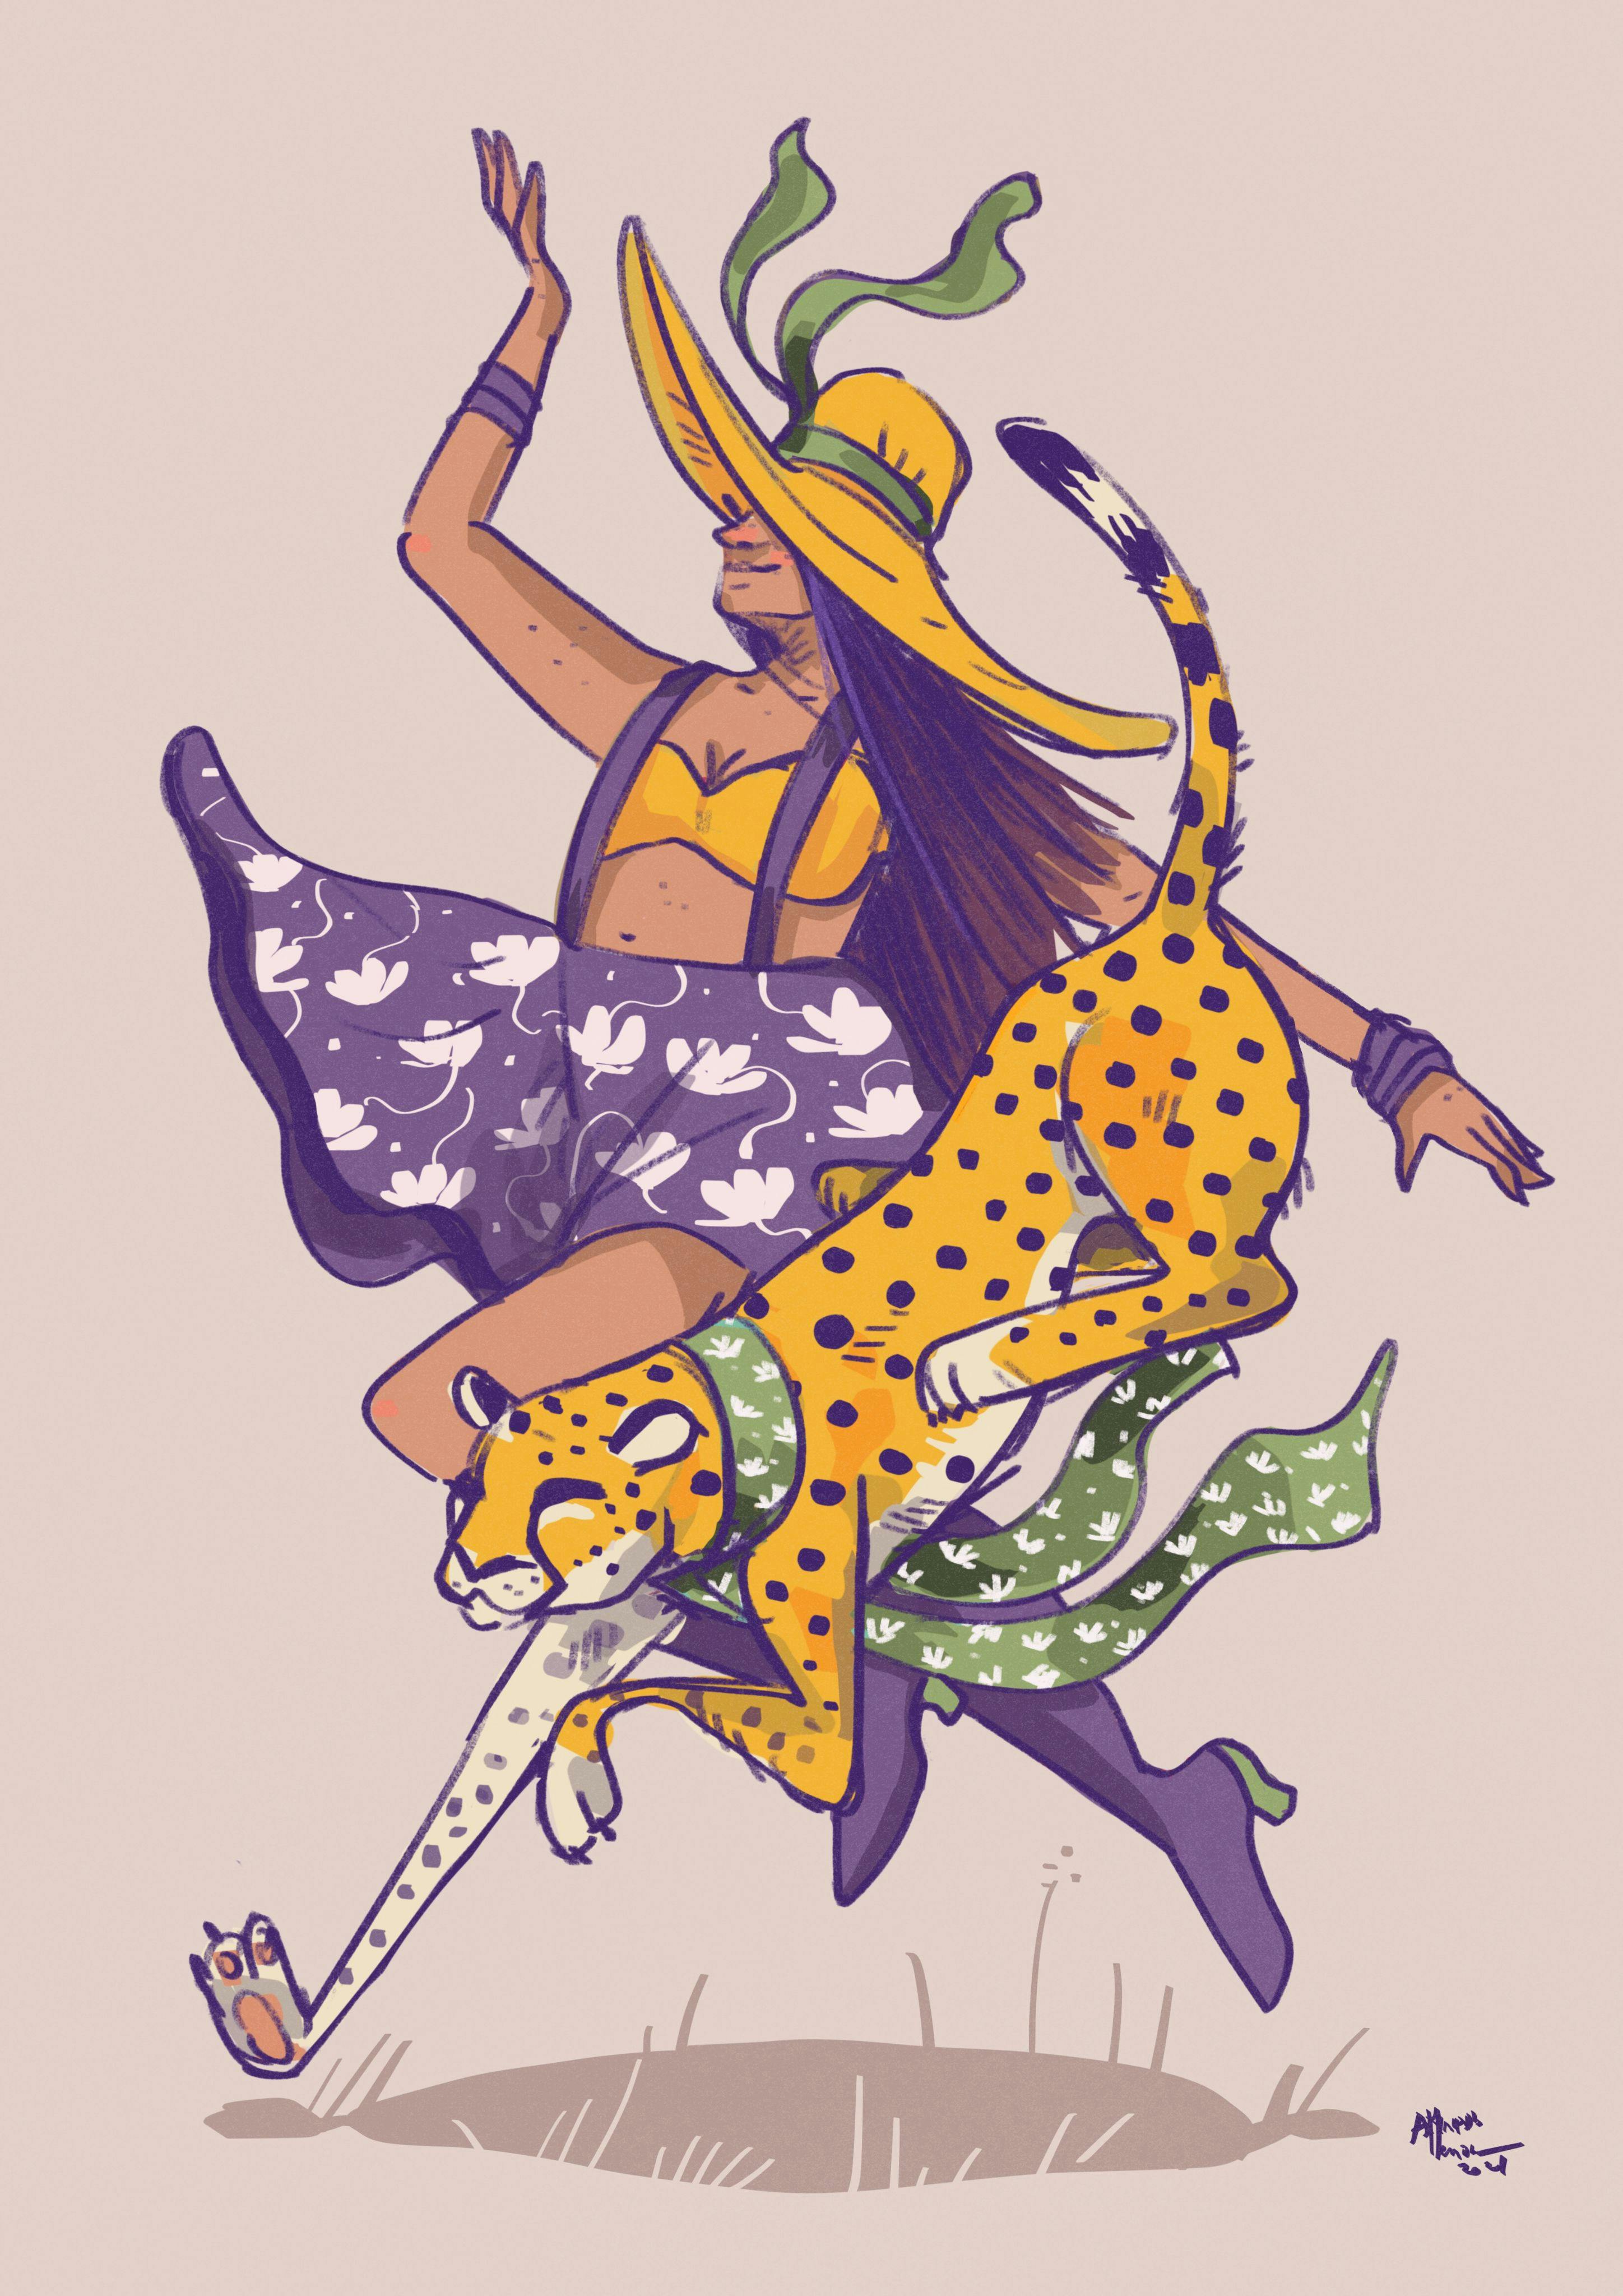 A woman running with a cheetah